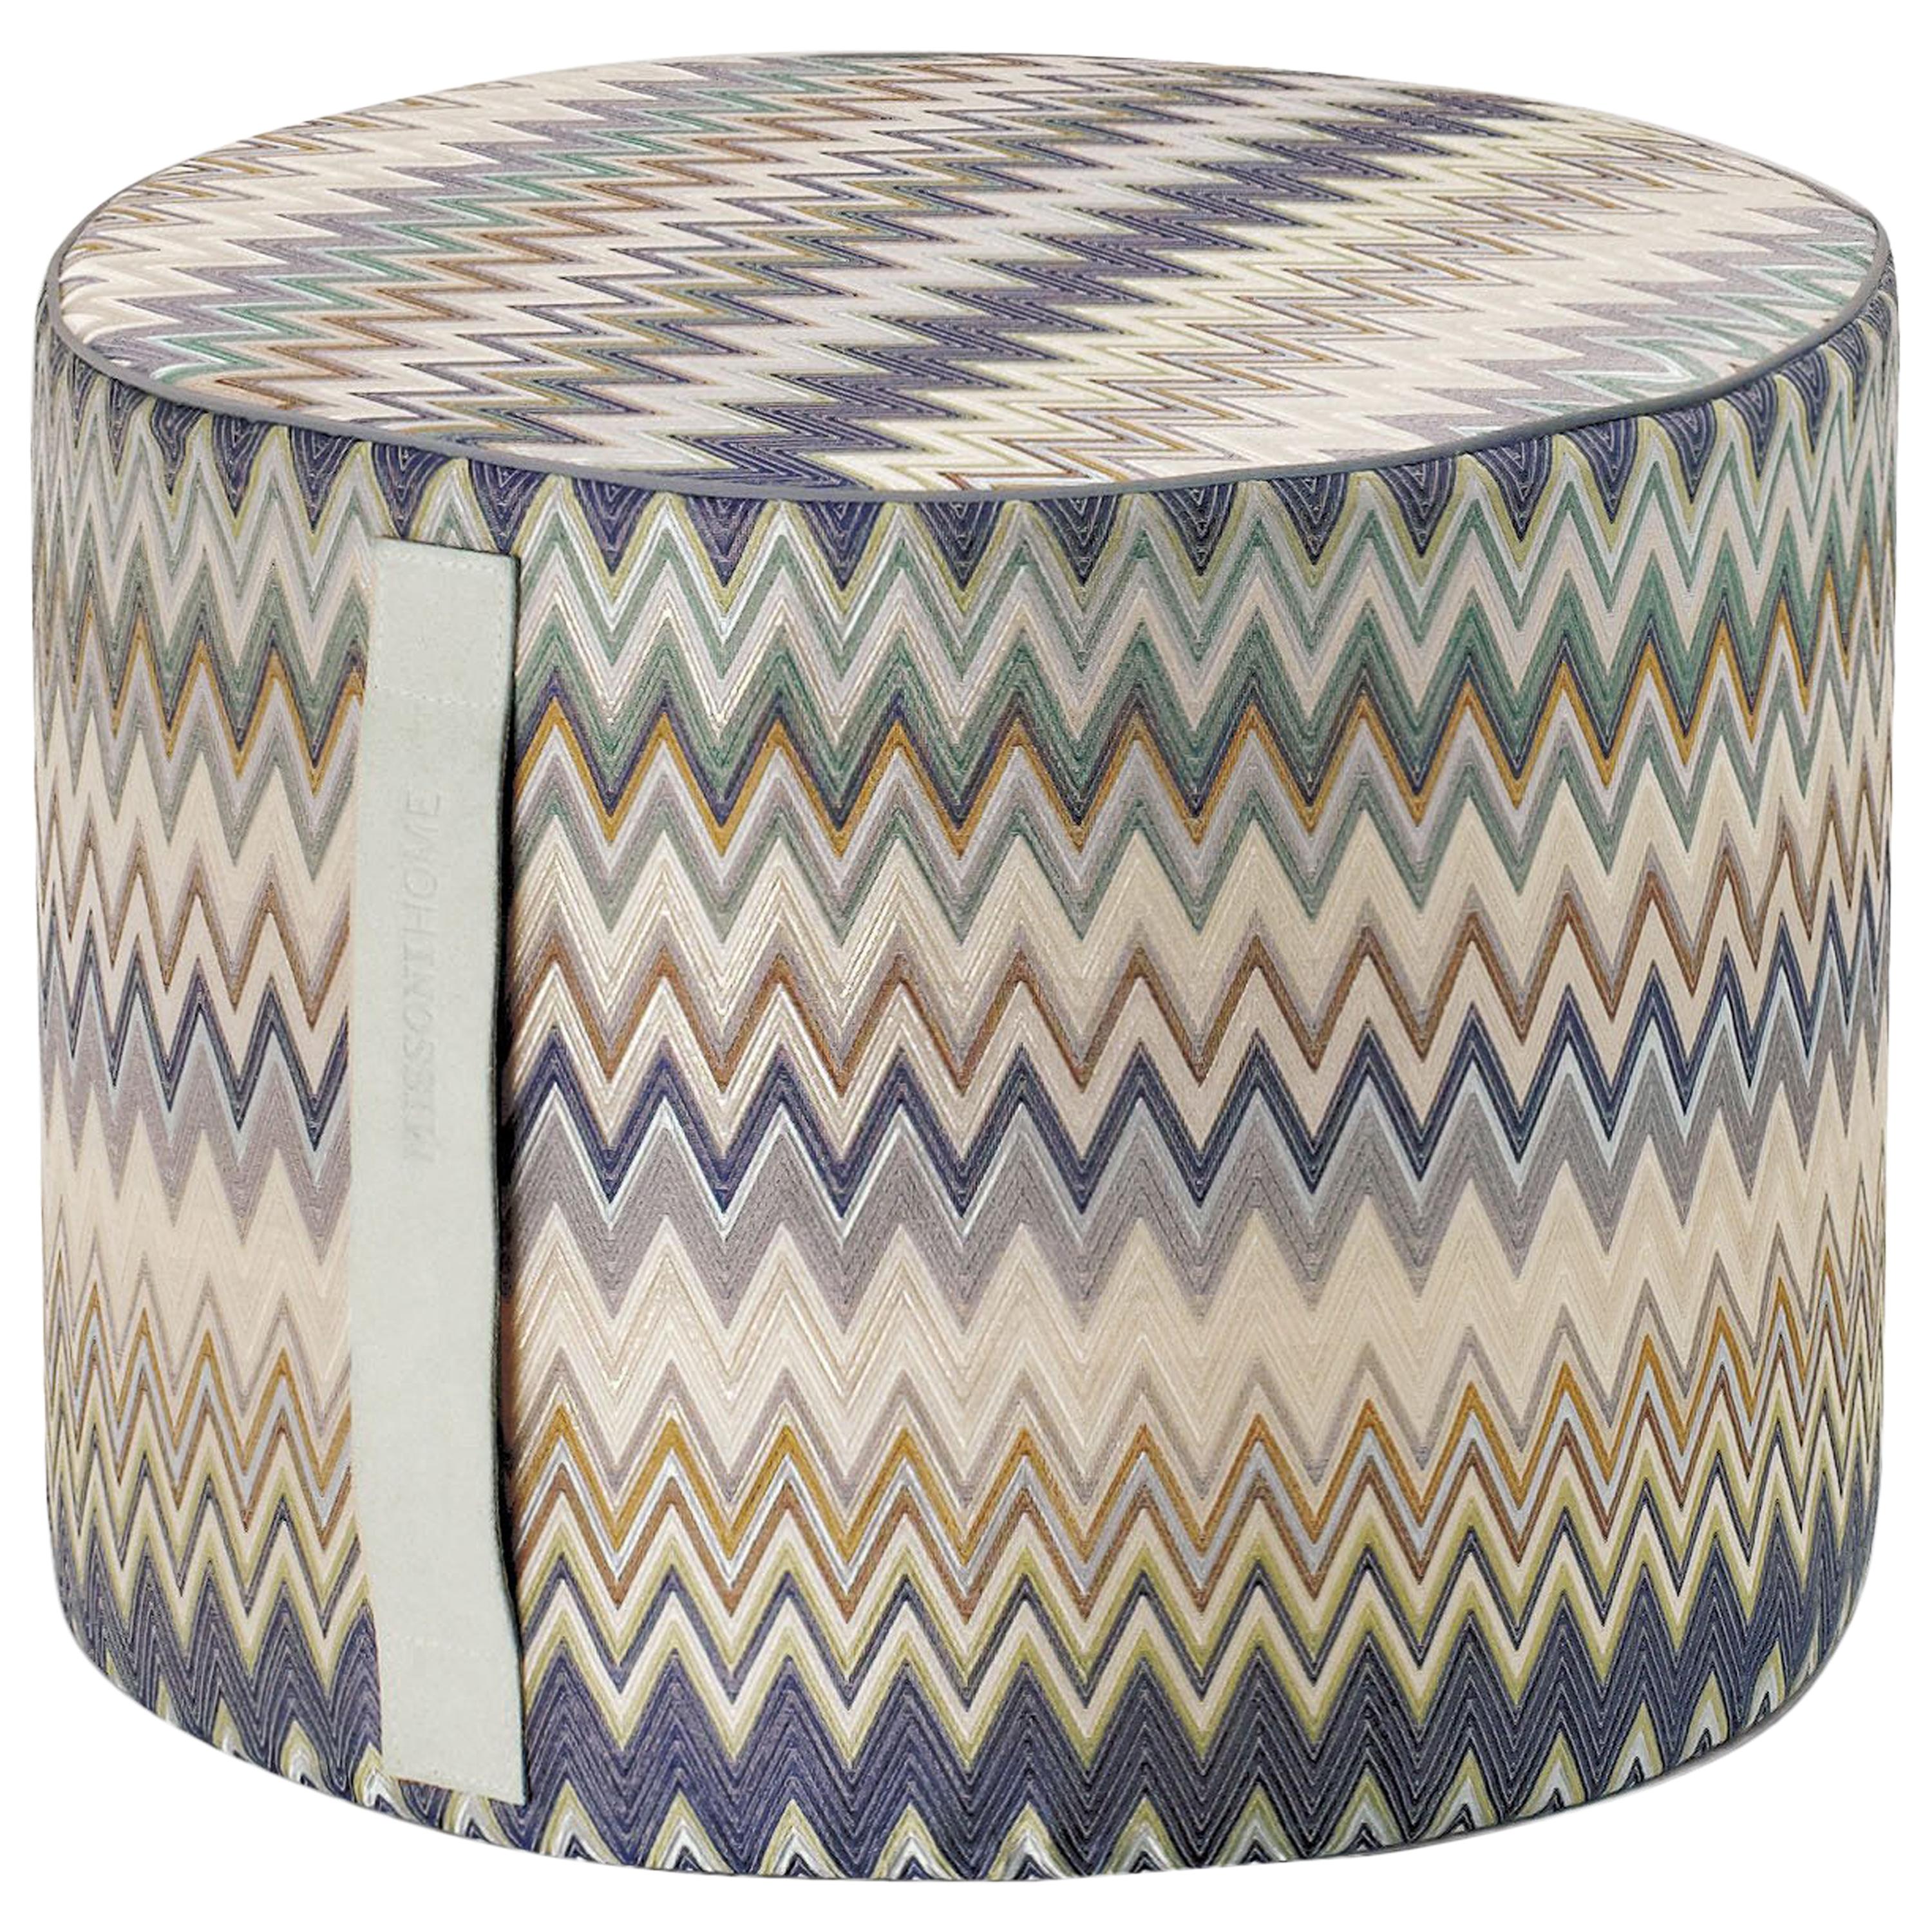 Missoni Home Masuleh Cylinder Pouf with Multicolor & Blue Chevron Print For Sale